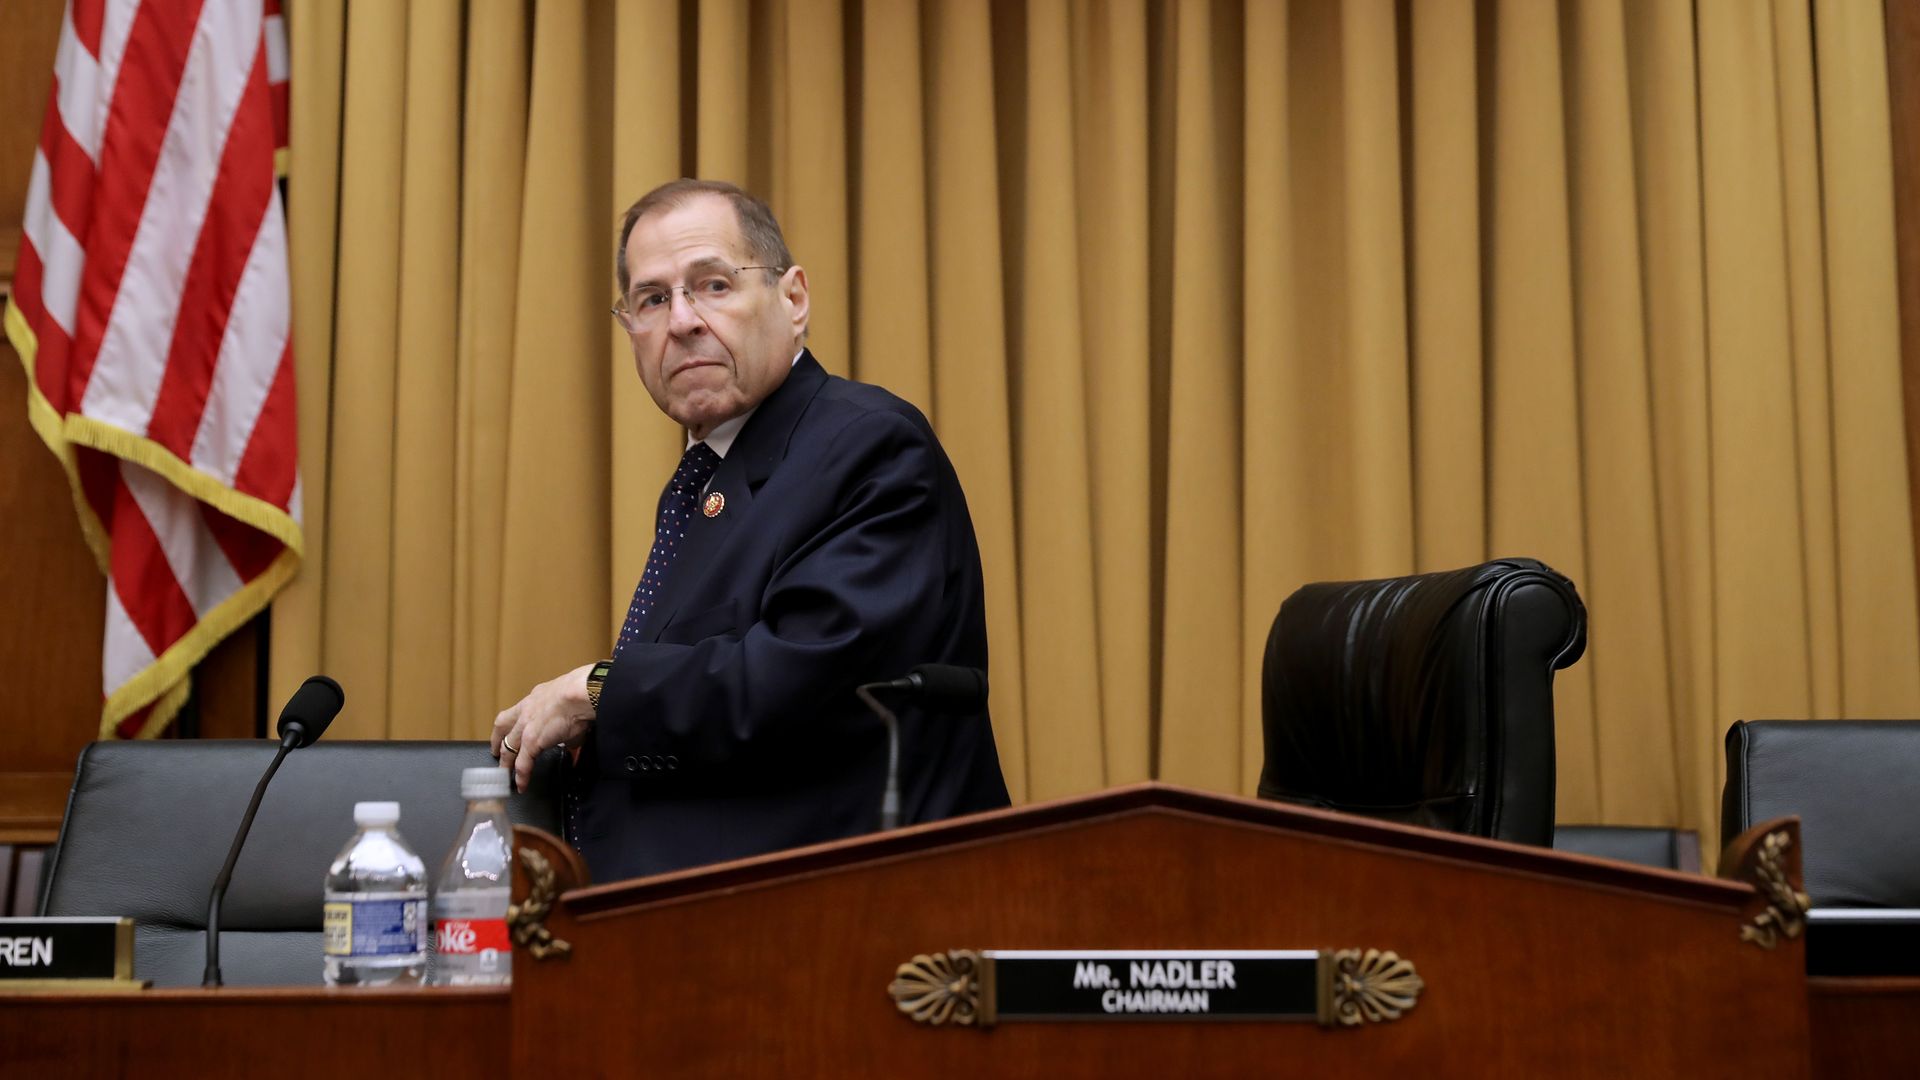 In this image, Nadler stands from his seat.